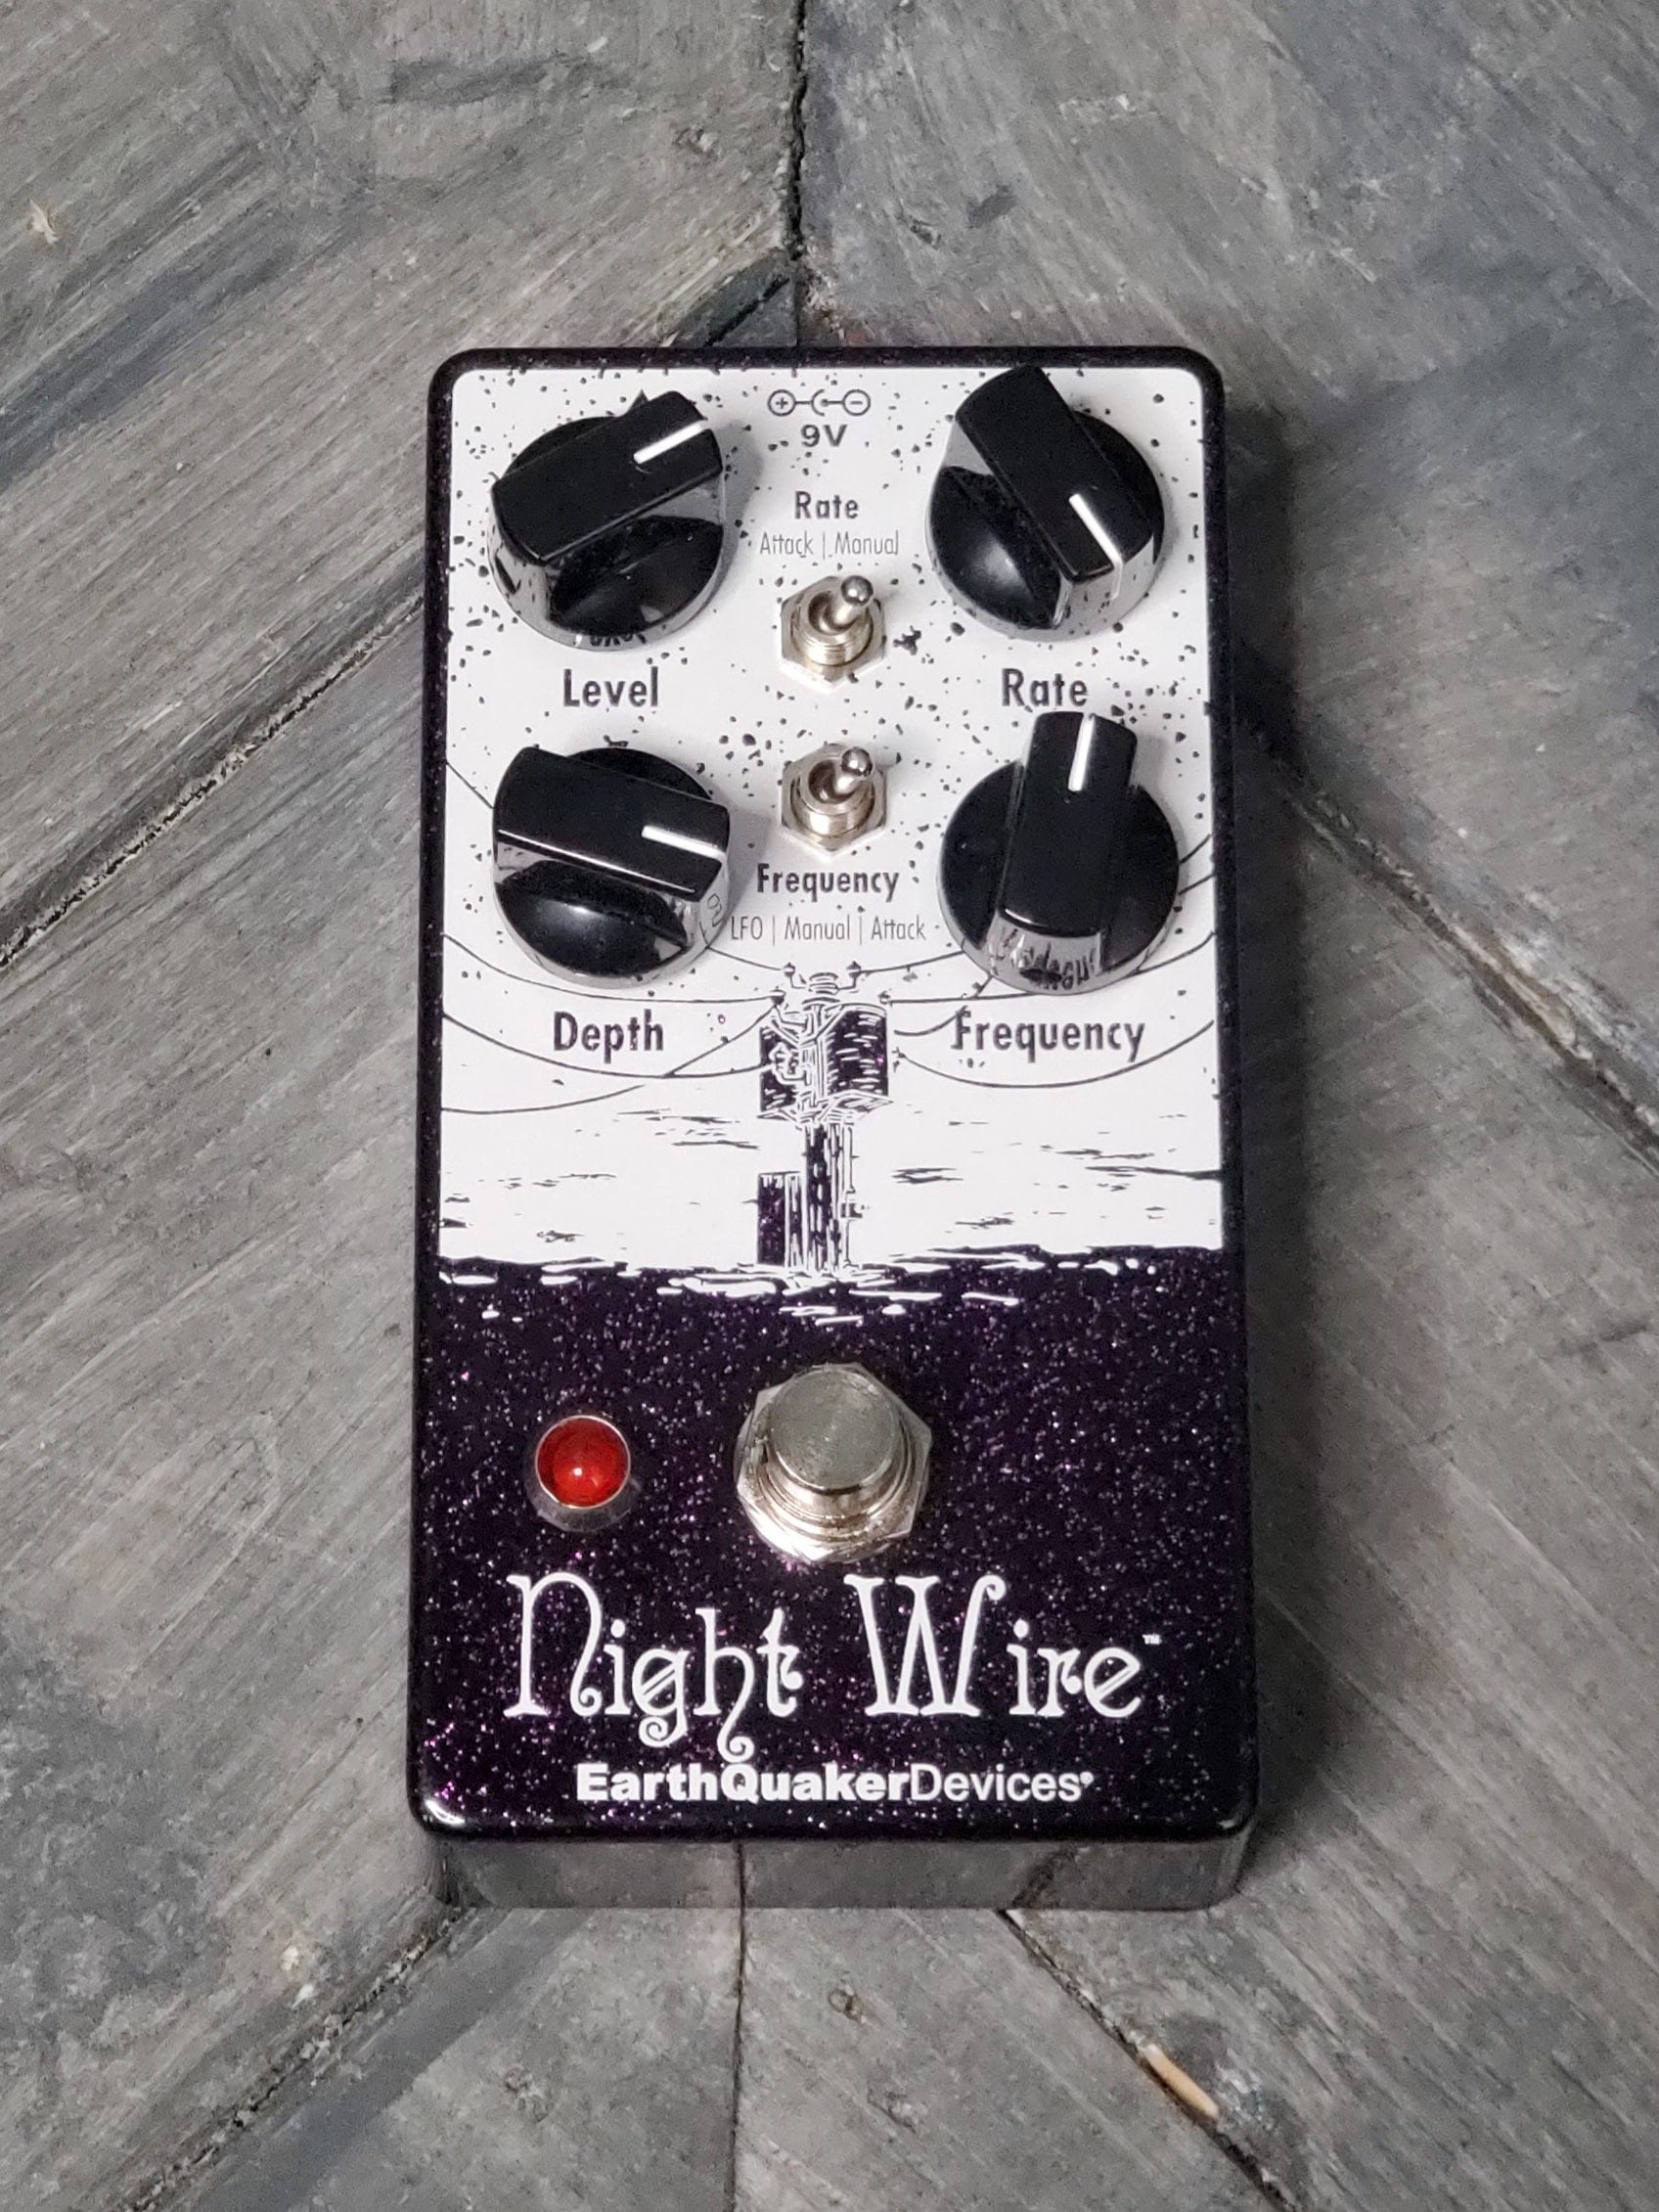 Earthquaker Devices pedal Earthquaker Devices Night Wire V2 Harmonic Tremolo Pedal